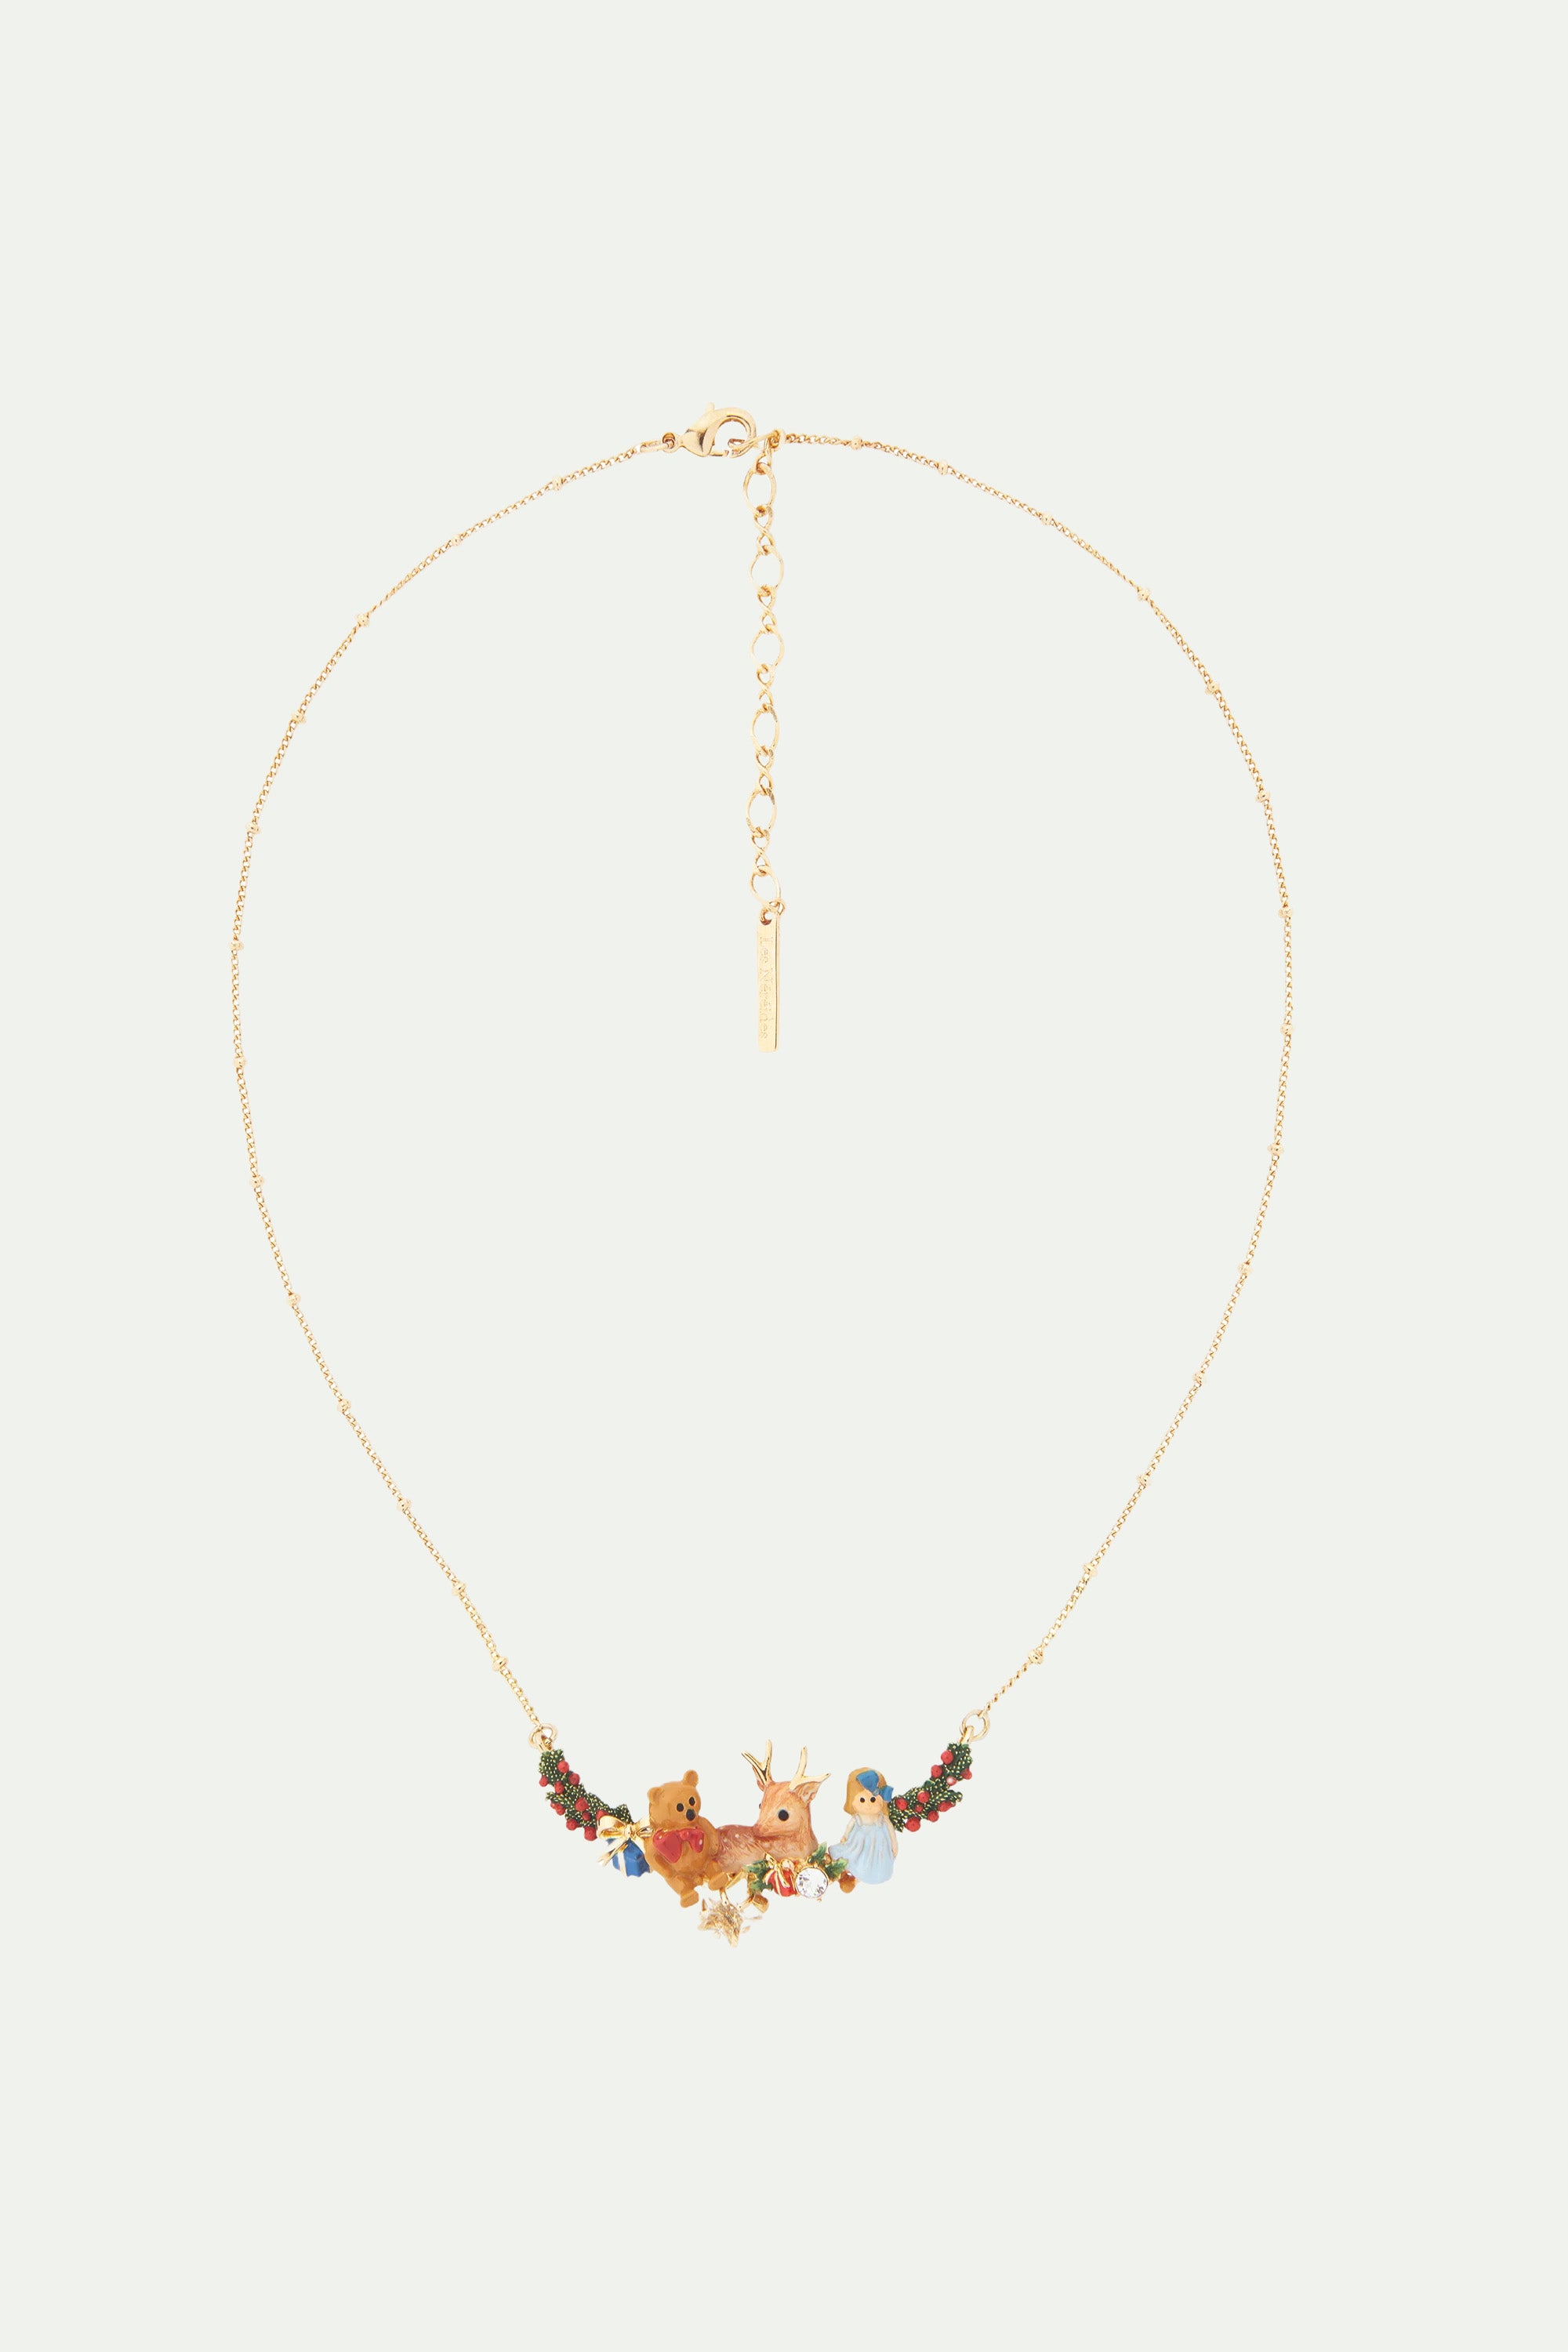 Fawn and christmas gift statement necklace